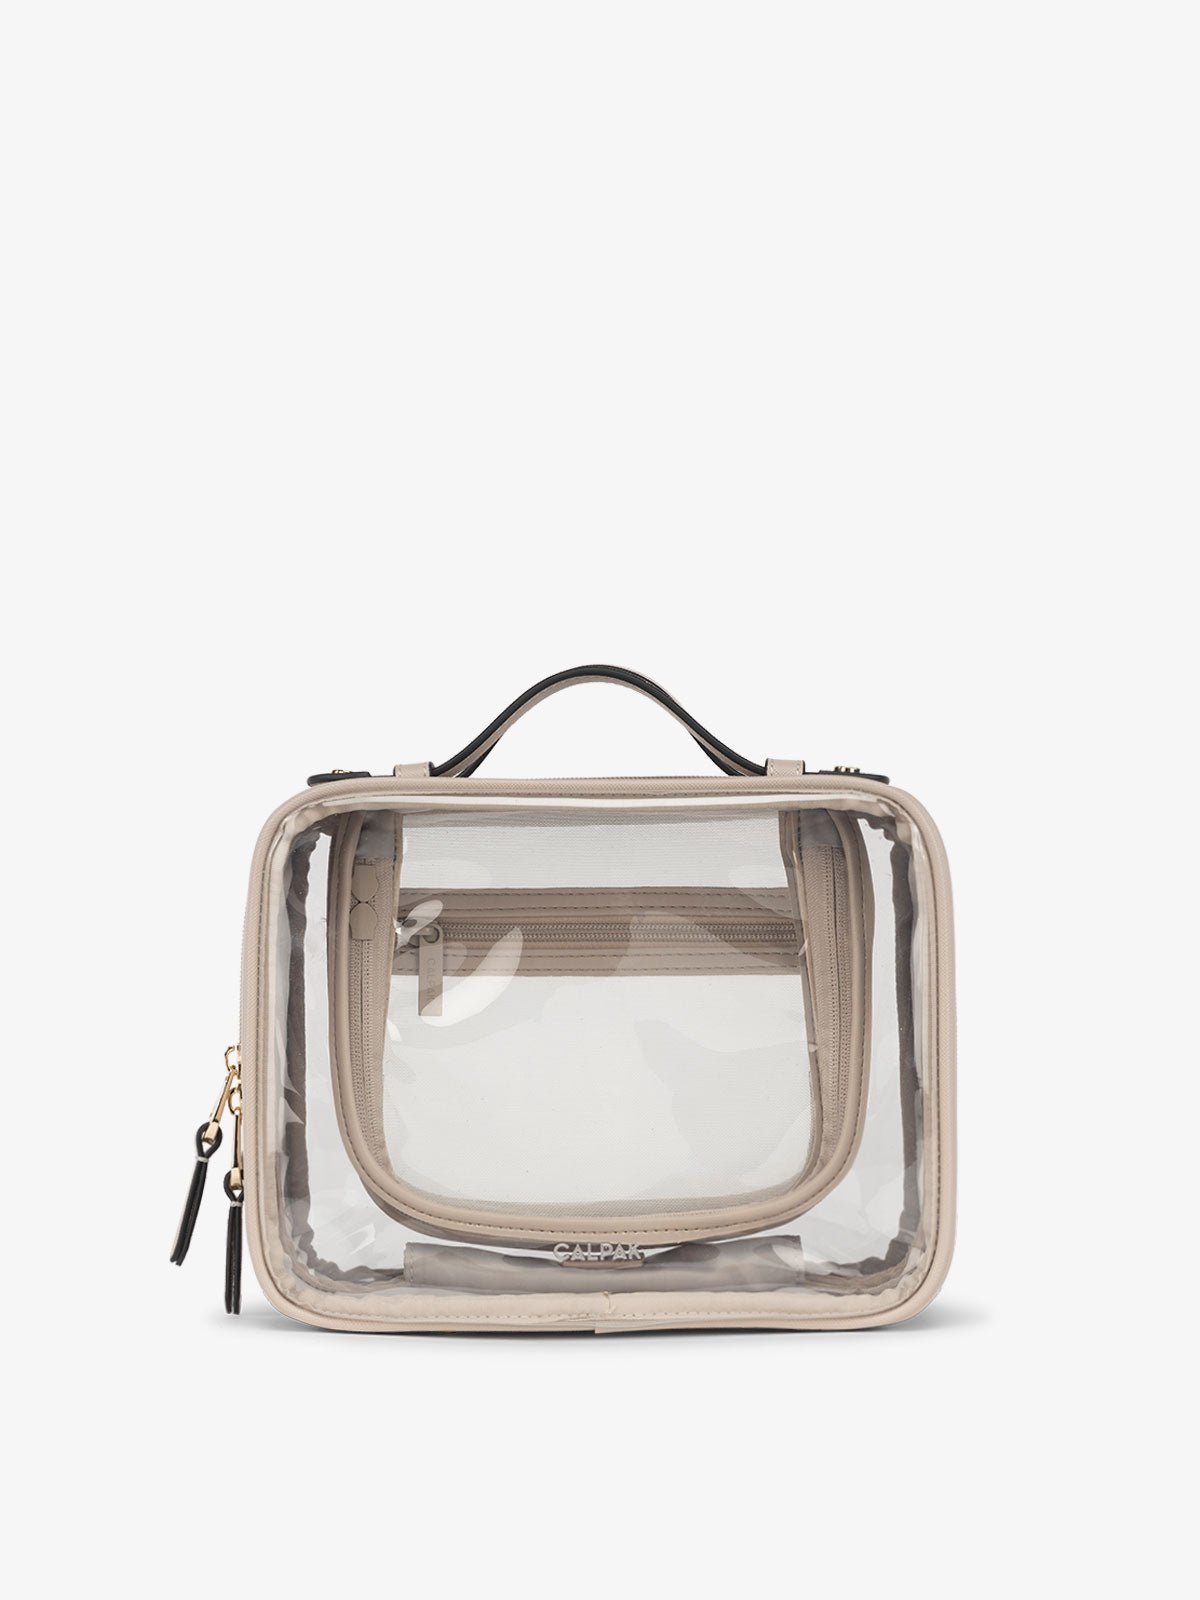 CALPAK Medium clear makeup bag with zippered compartments in stone